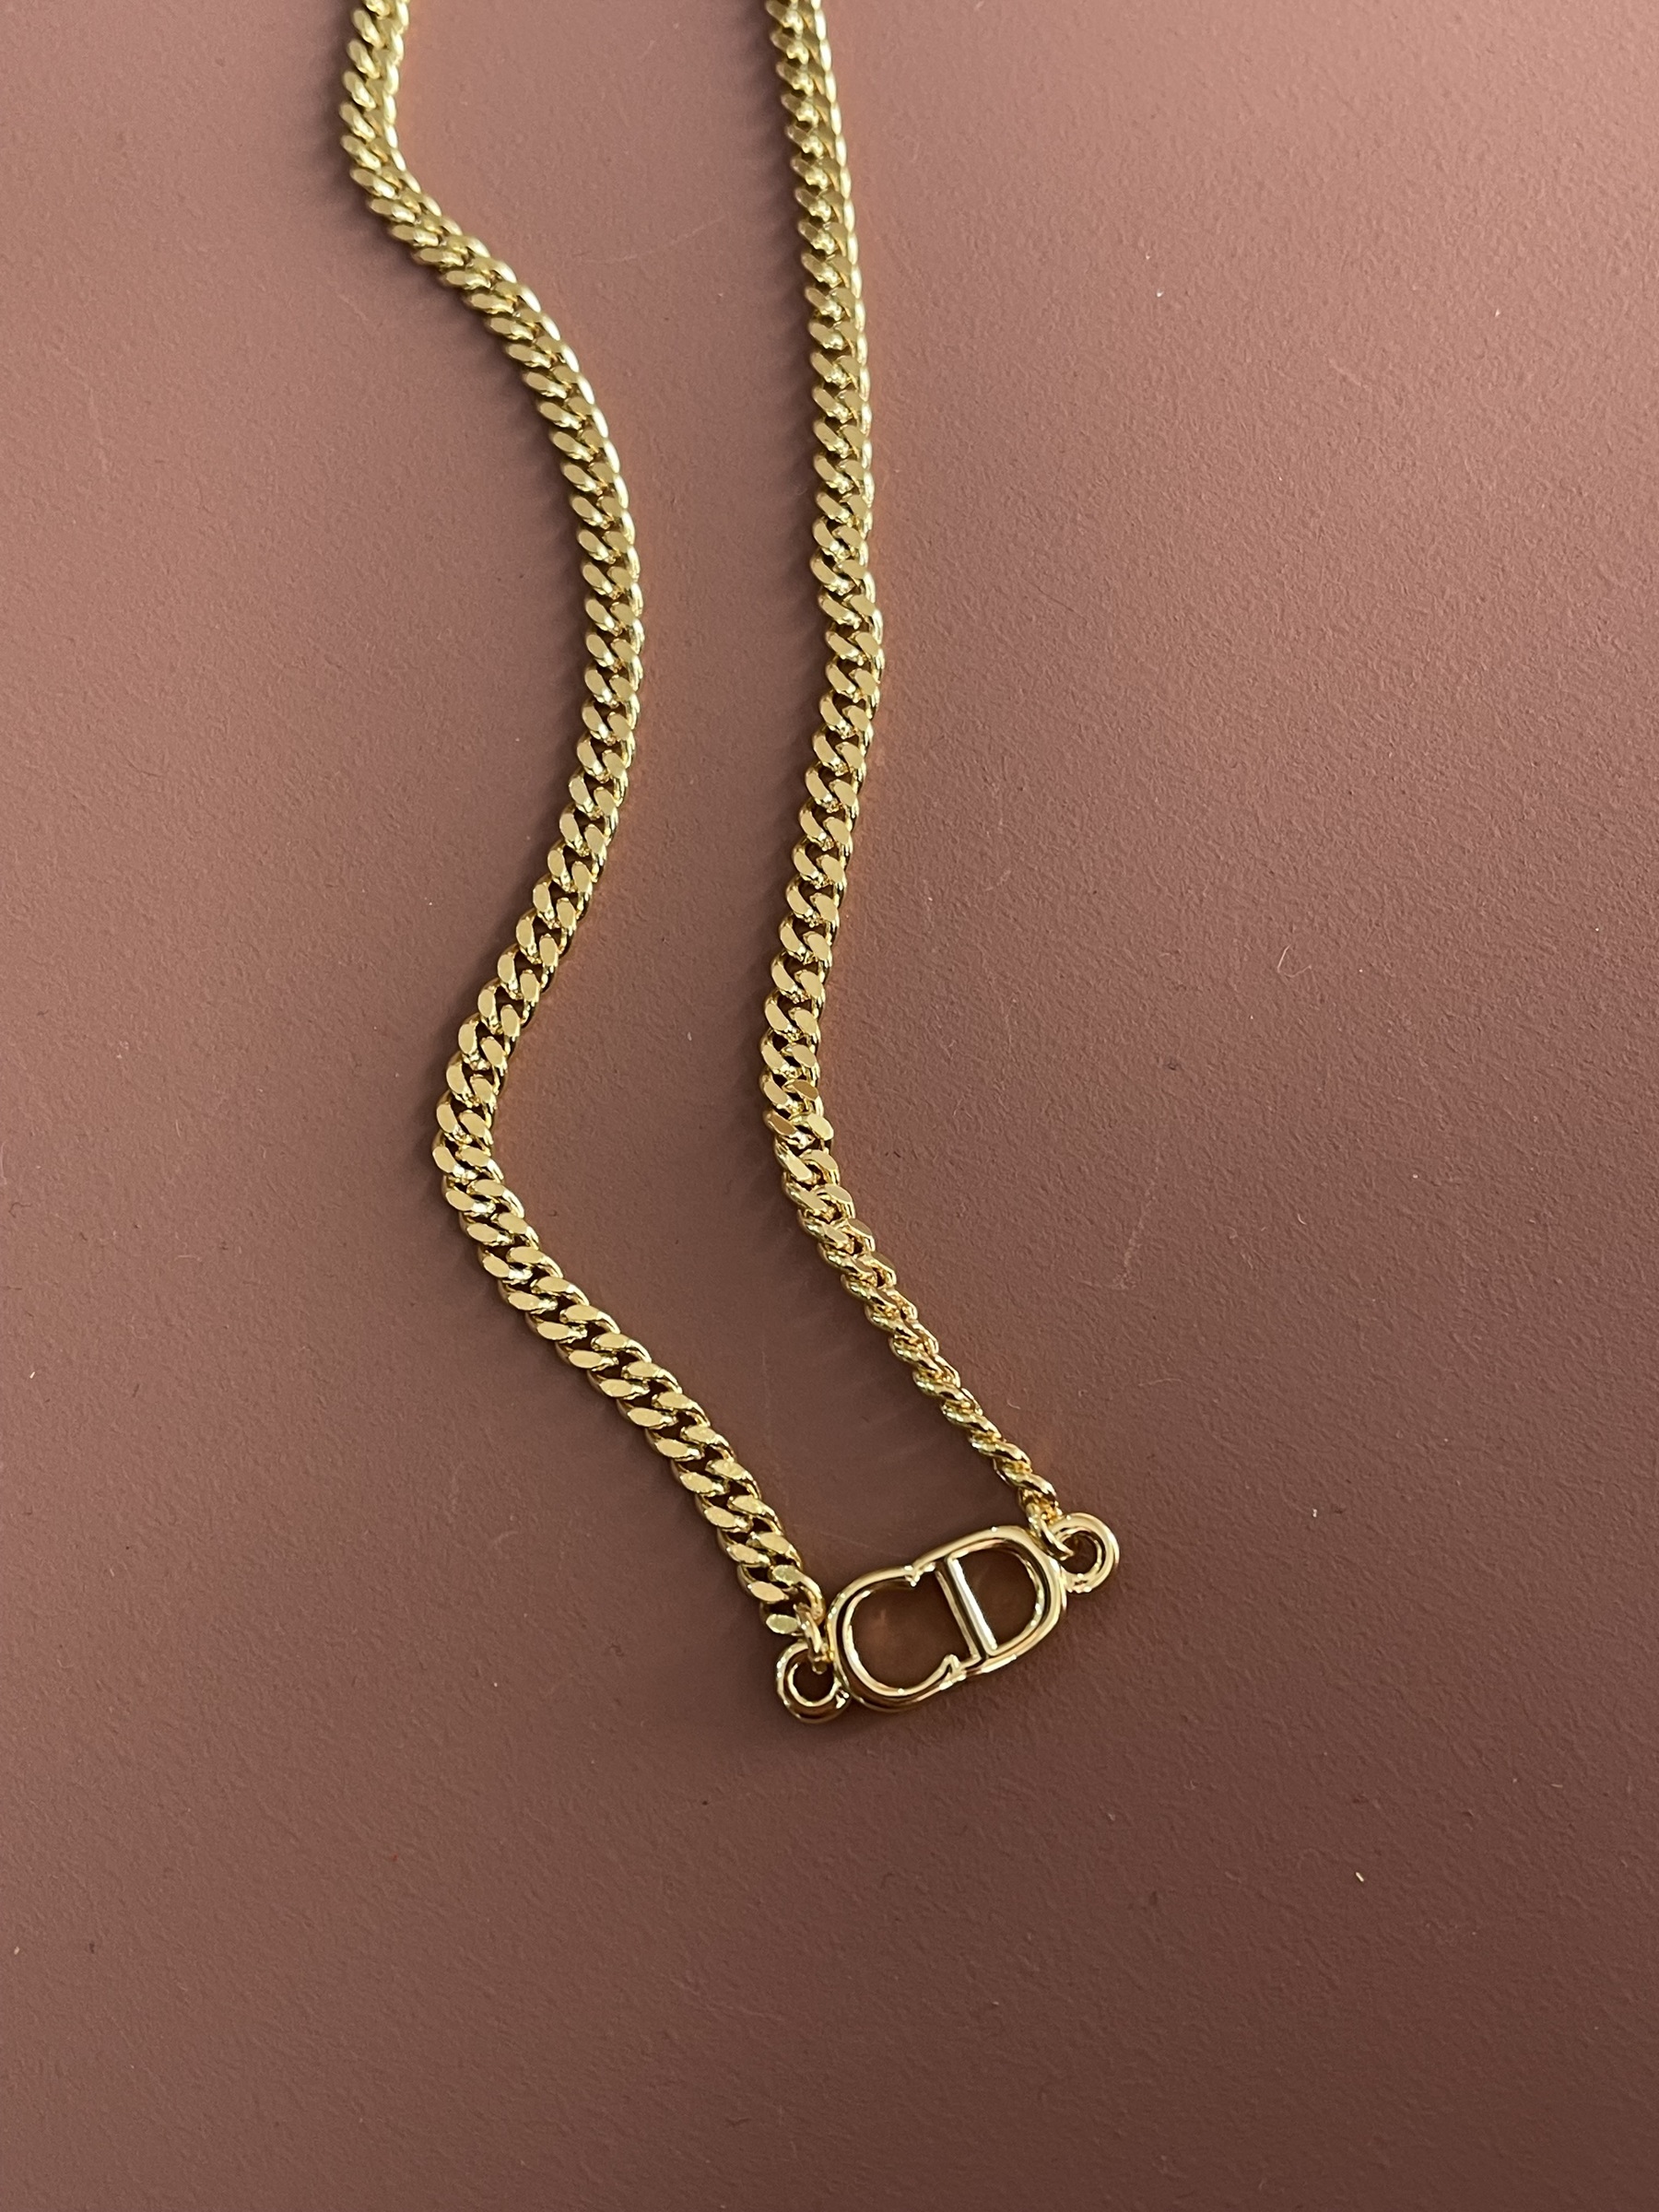 Authentic Christian Dior Necklace Gold Plated Signature Charm CD Logo Chain  Jewelry 0p8448 - Etsy